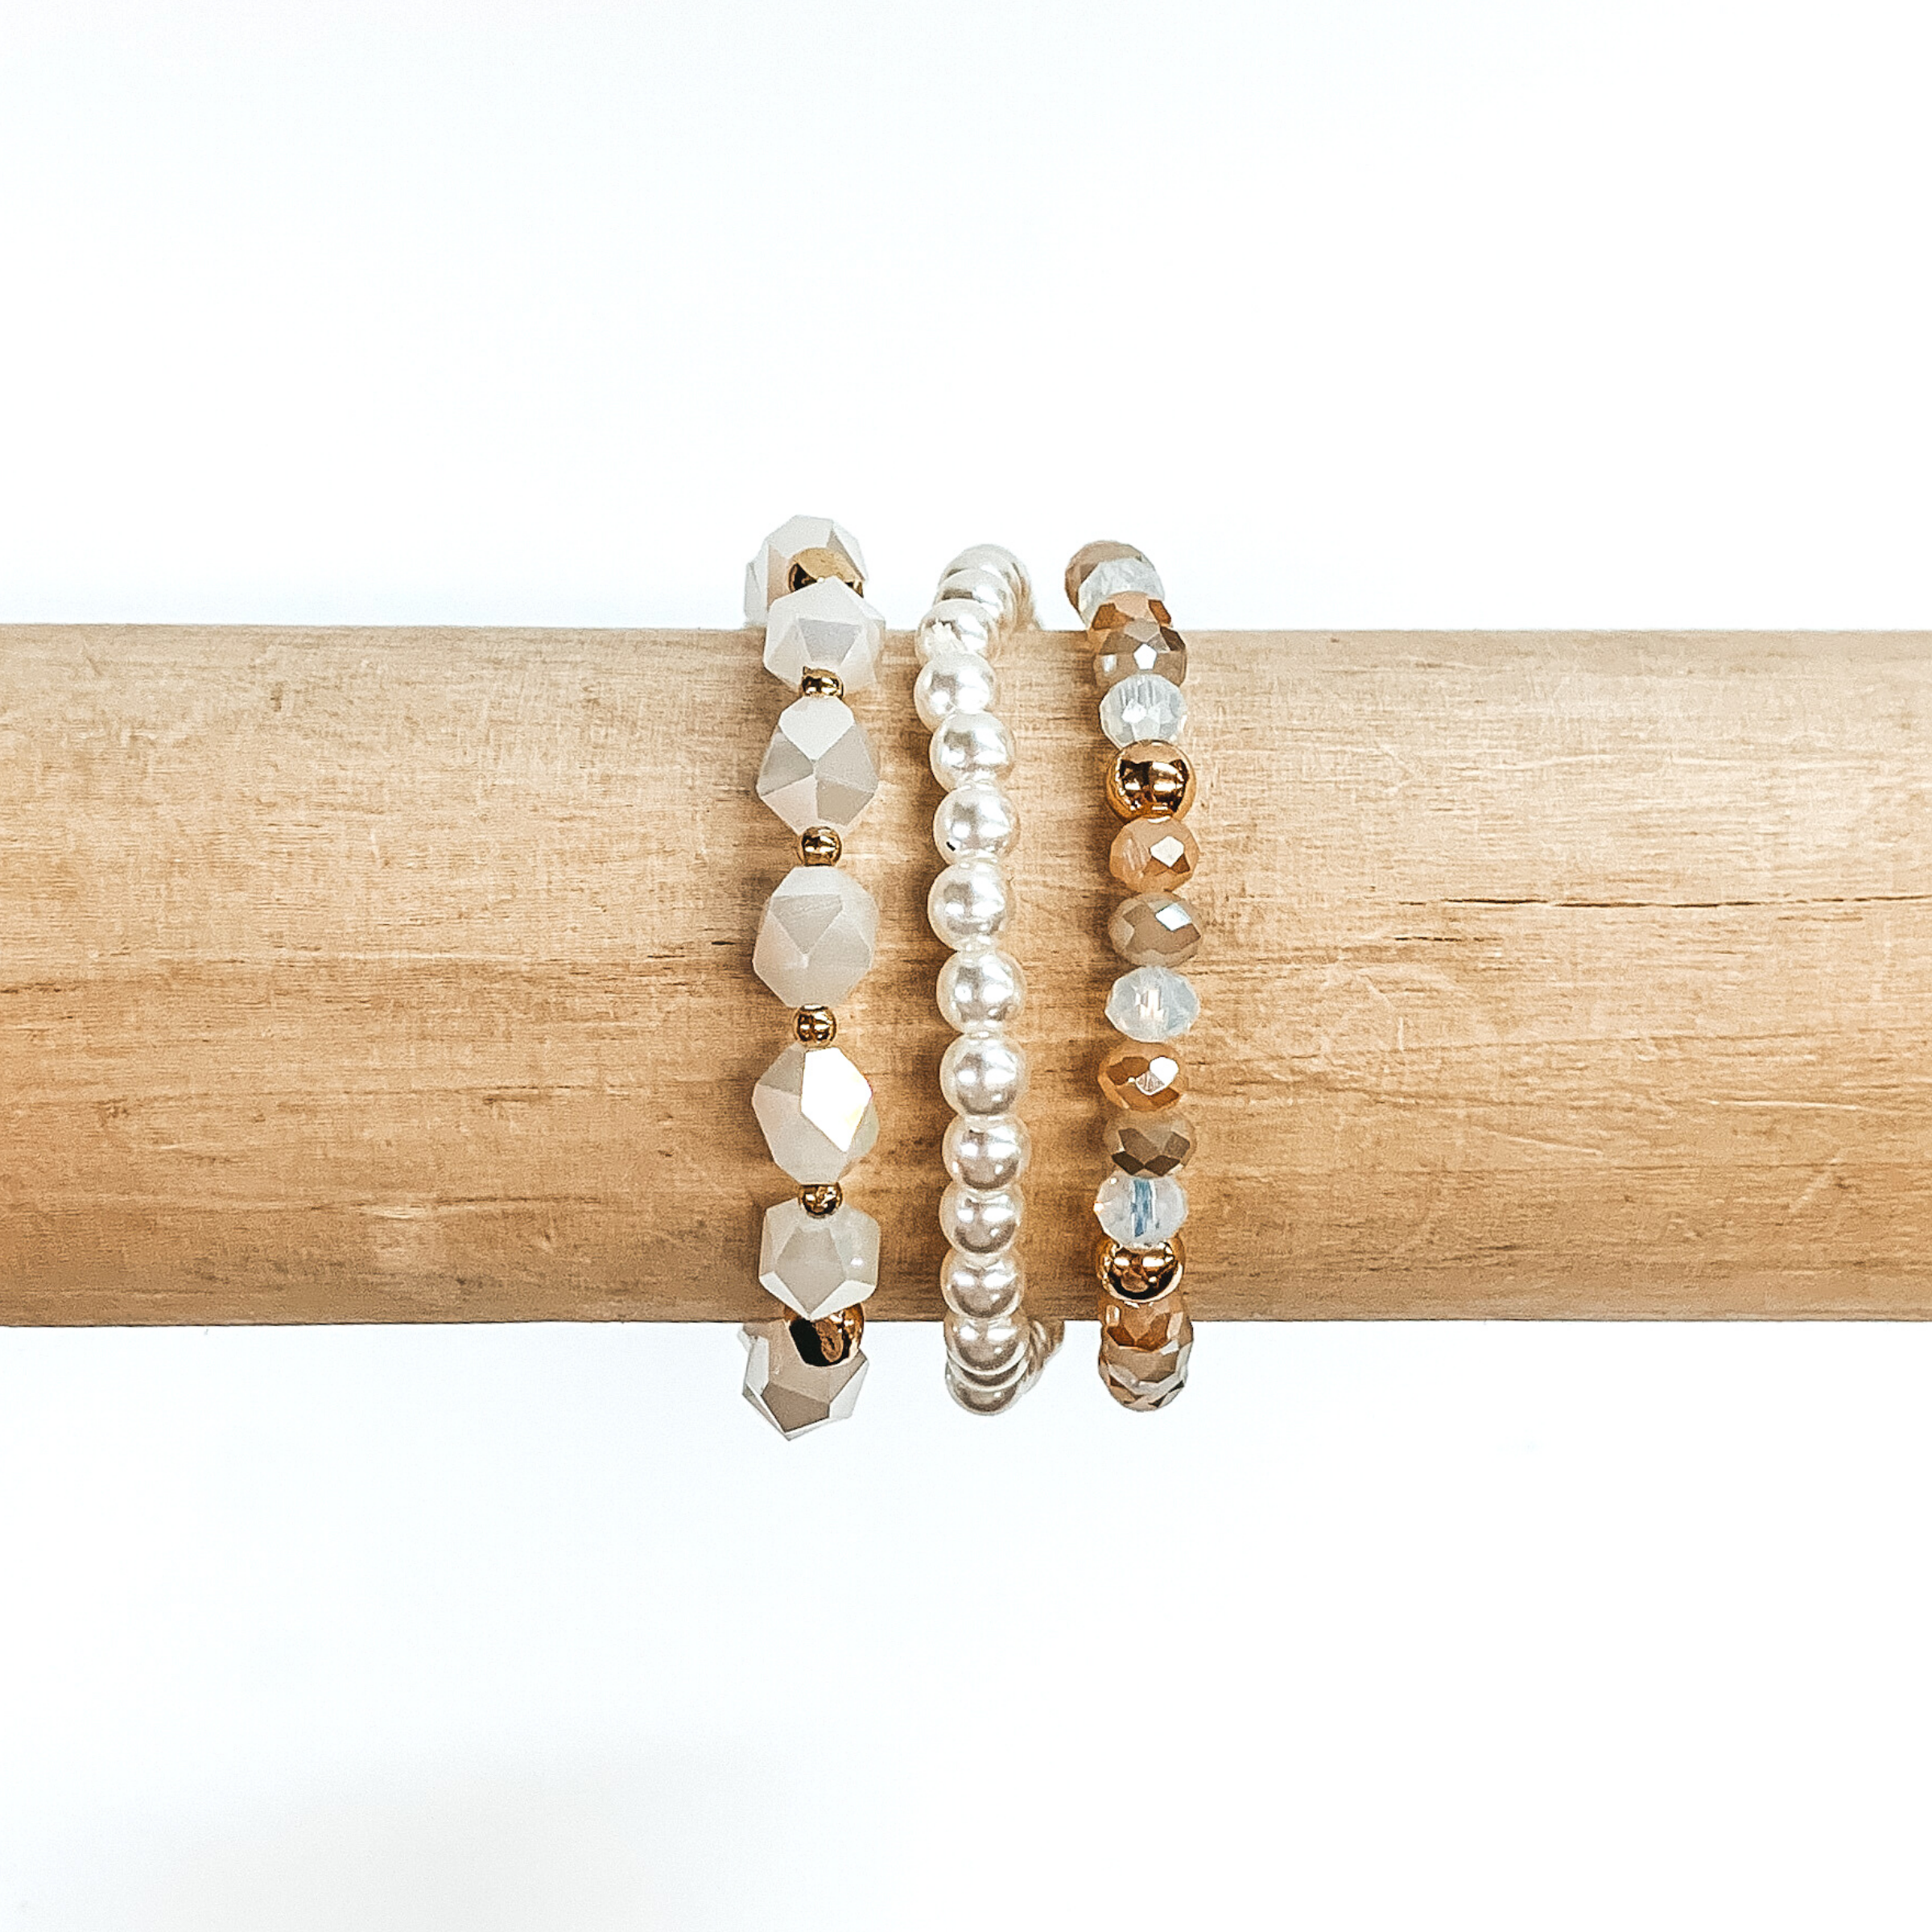 Beaded bracelet set with three different bracelets. One bracelet is white pearl beads only. The next one has big white crystal beads with gold spacers. The last braclet has a mixture of tan, champagne, and clear crystal beads with gold spacers. These bracelets are pictured on a wood bracelet holder on a white background.